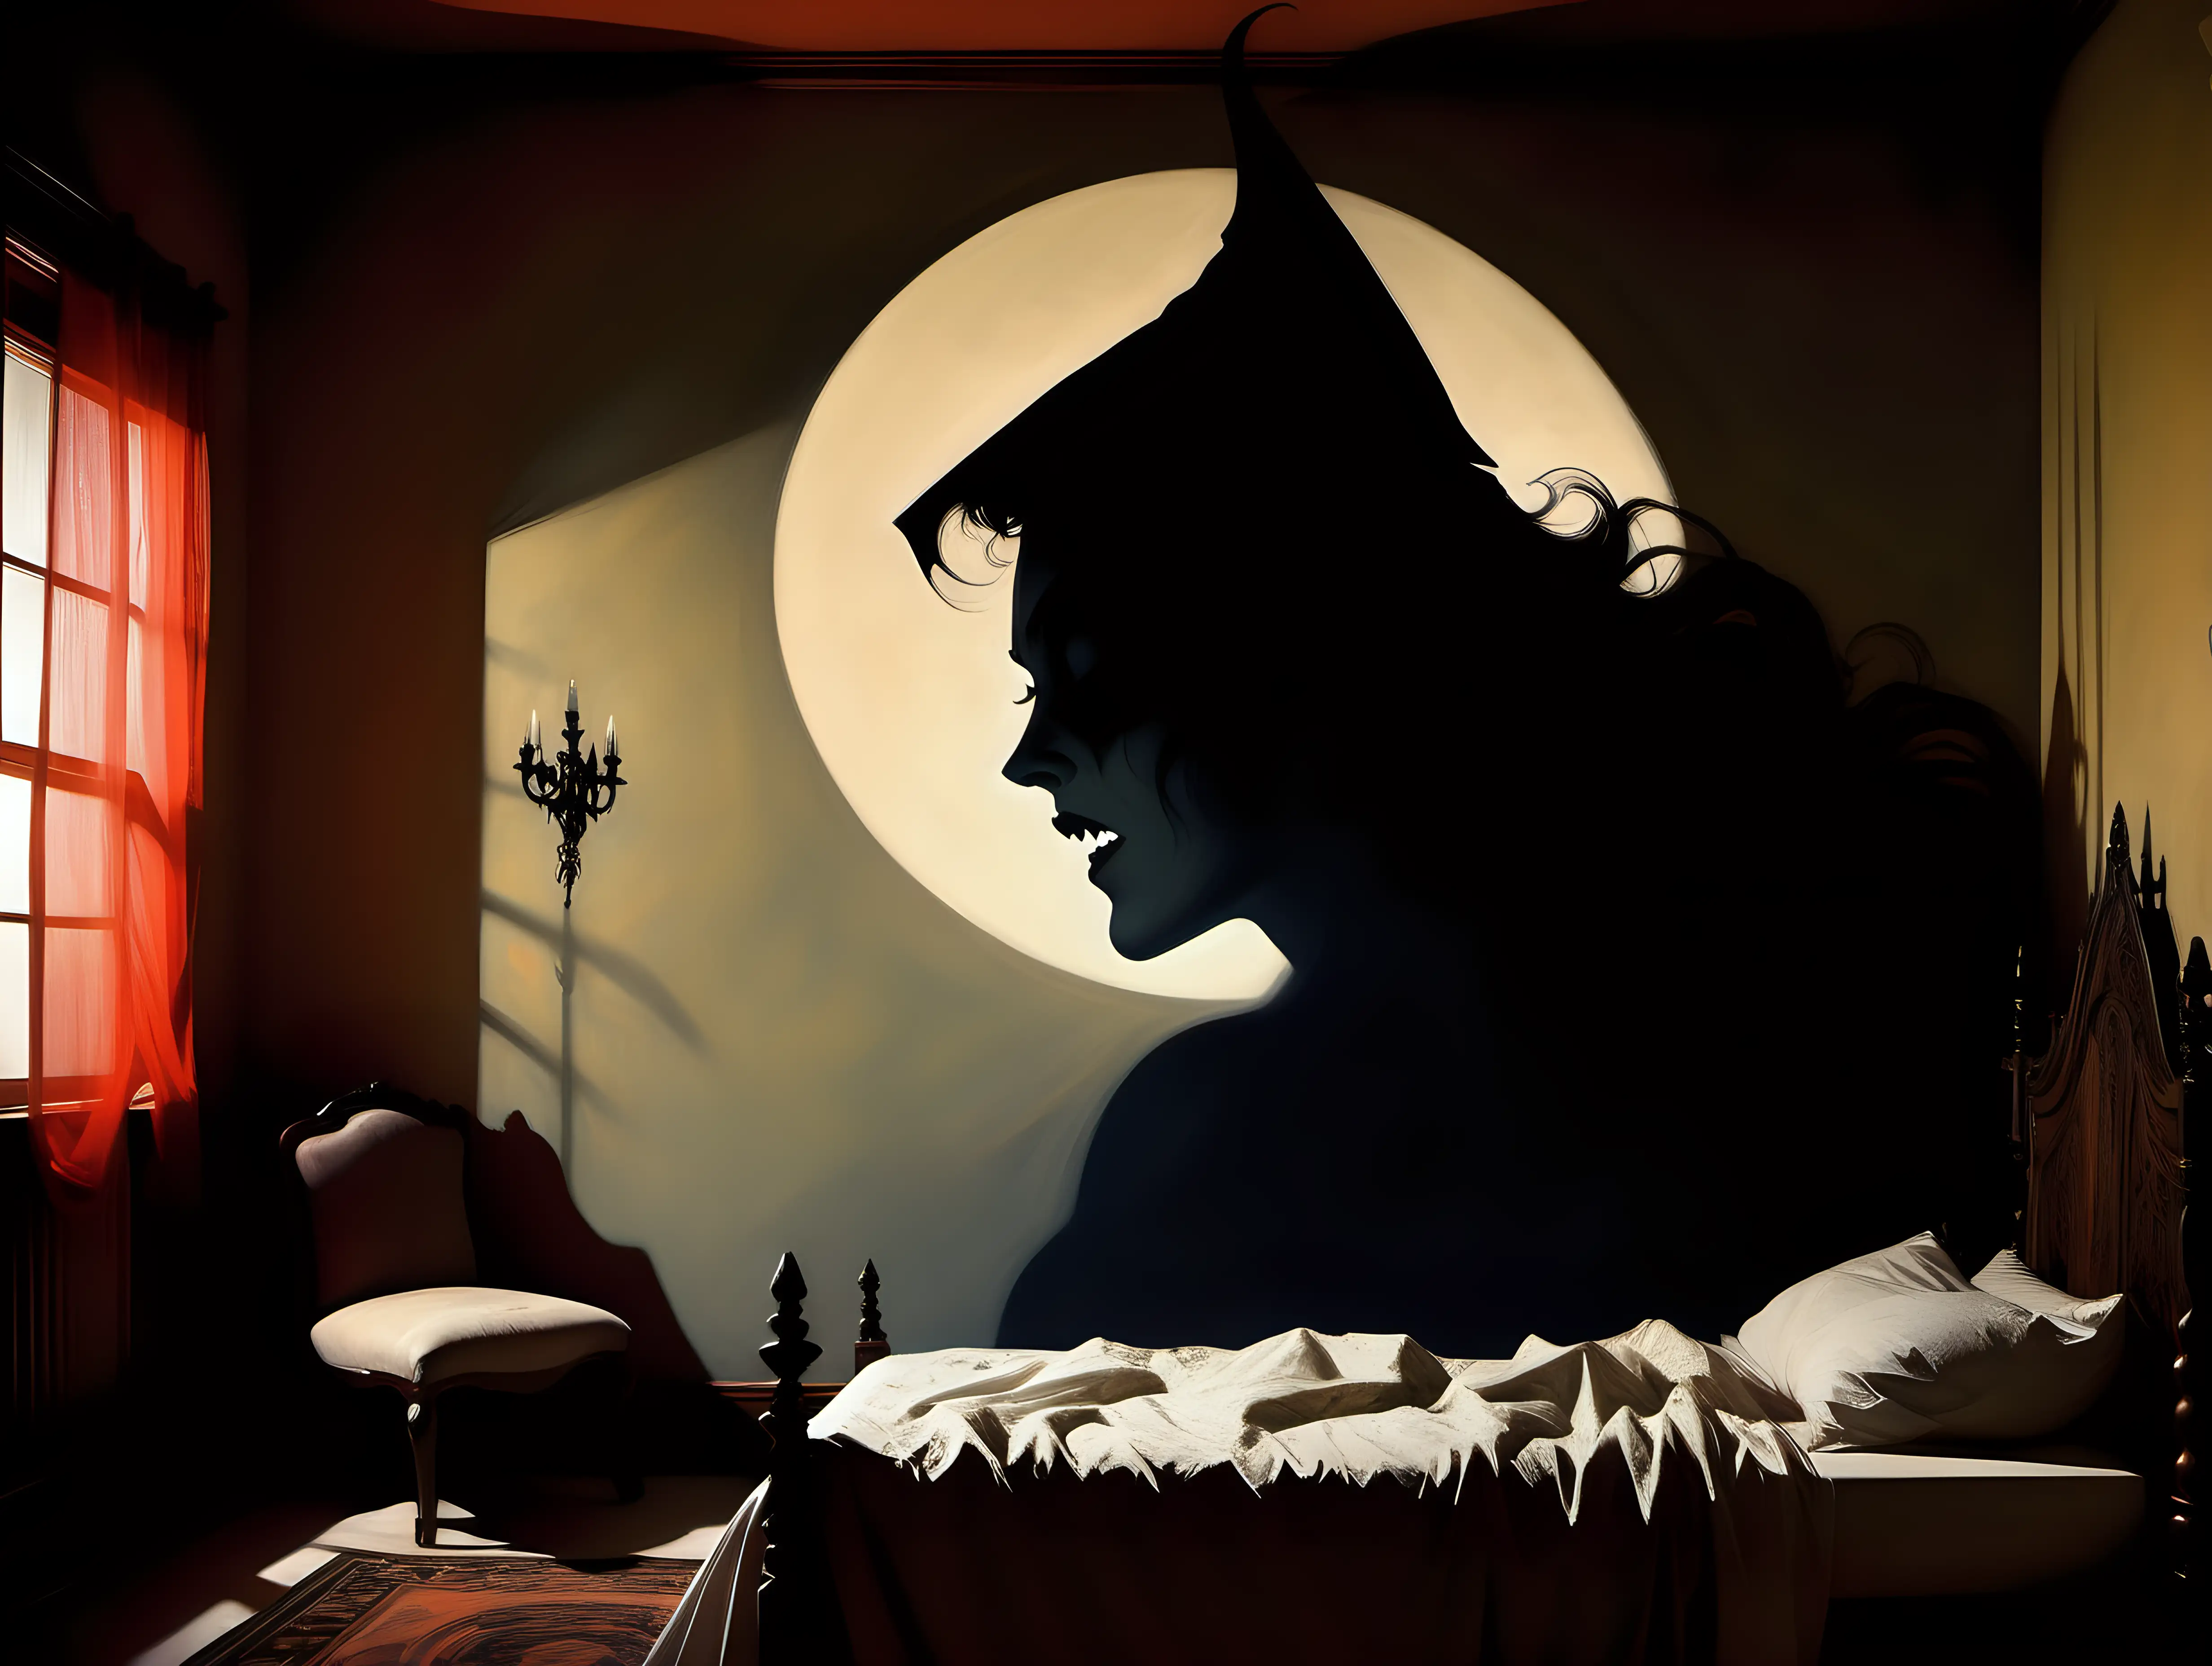 dracula's shadow on the bedroom wall of a woman sleeping in bed
Frank Frazetta style